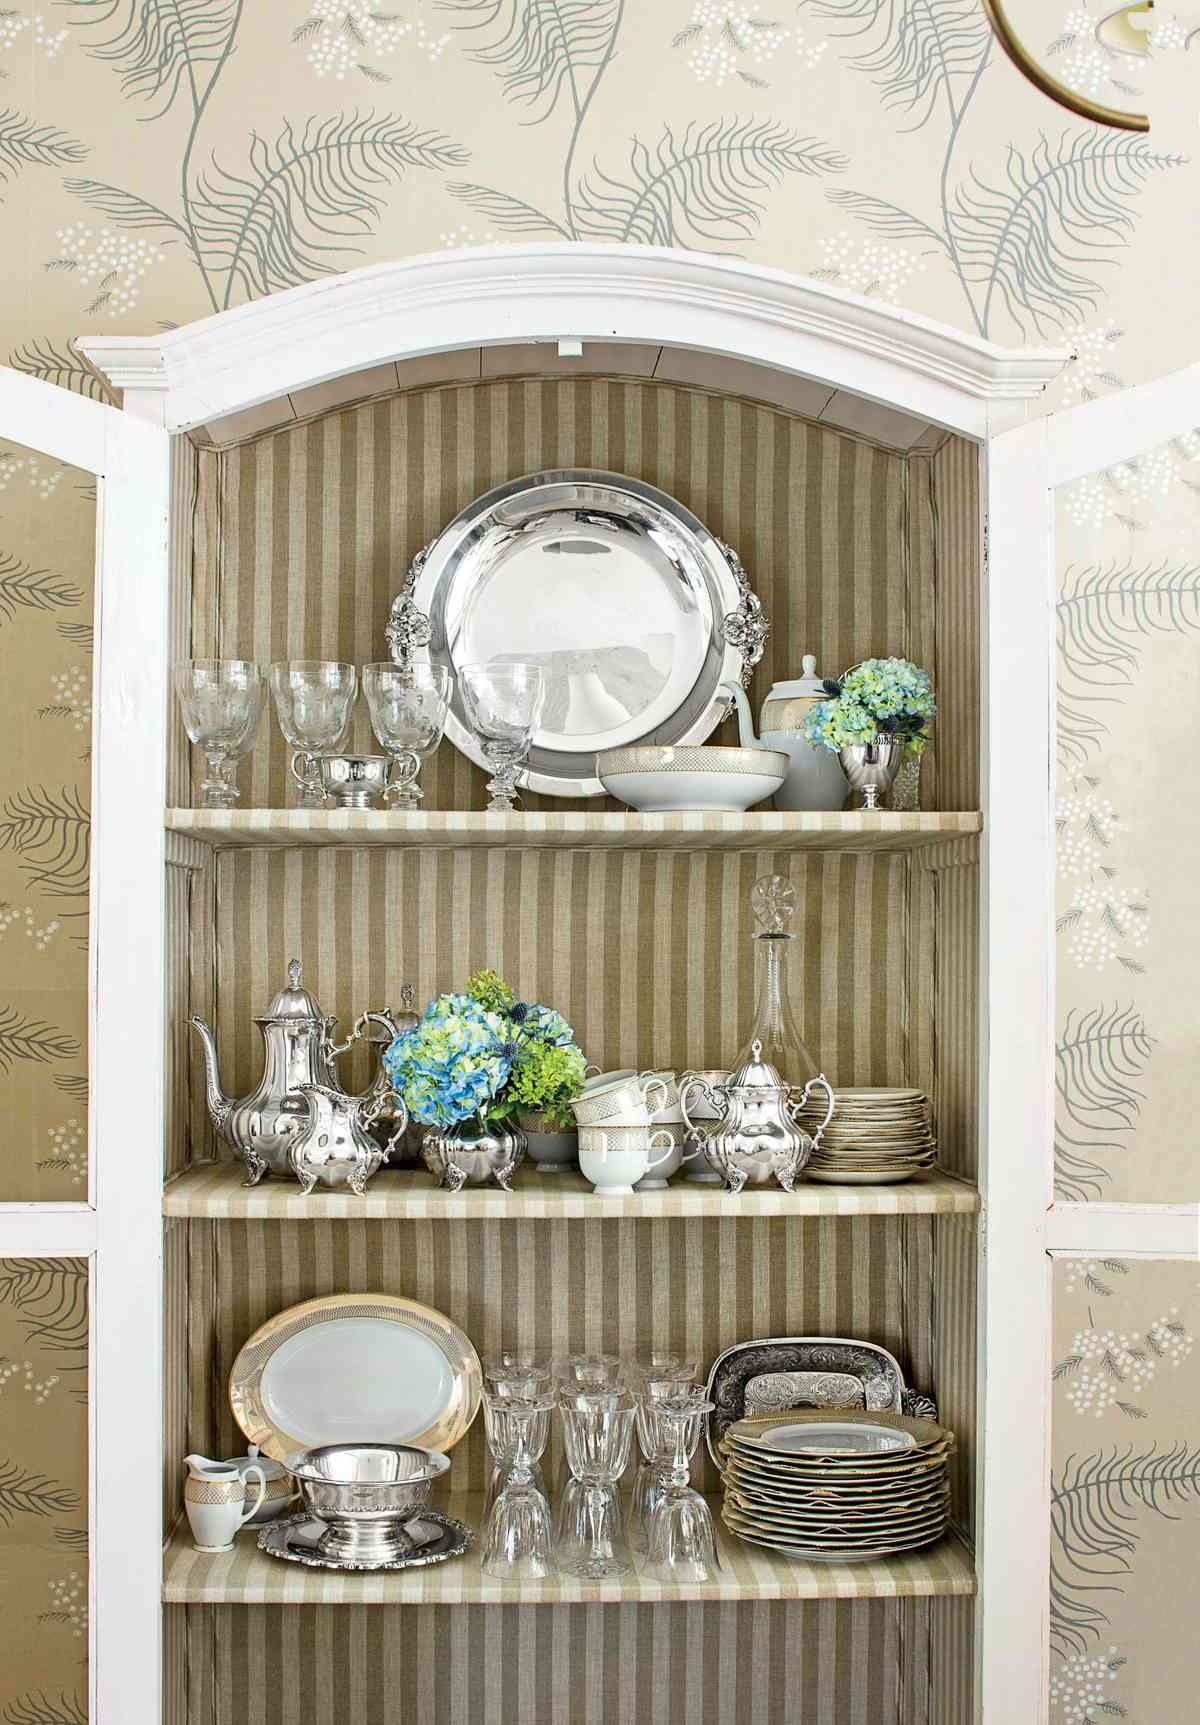 China Cabinet with Striped Fabric